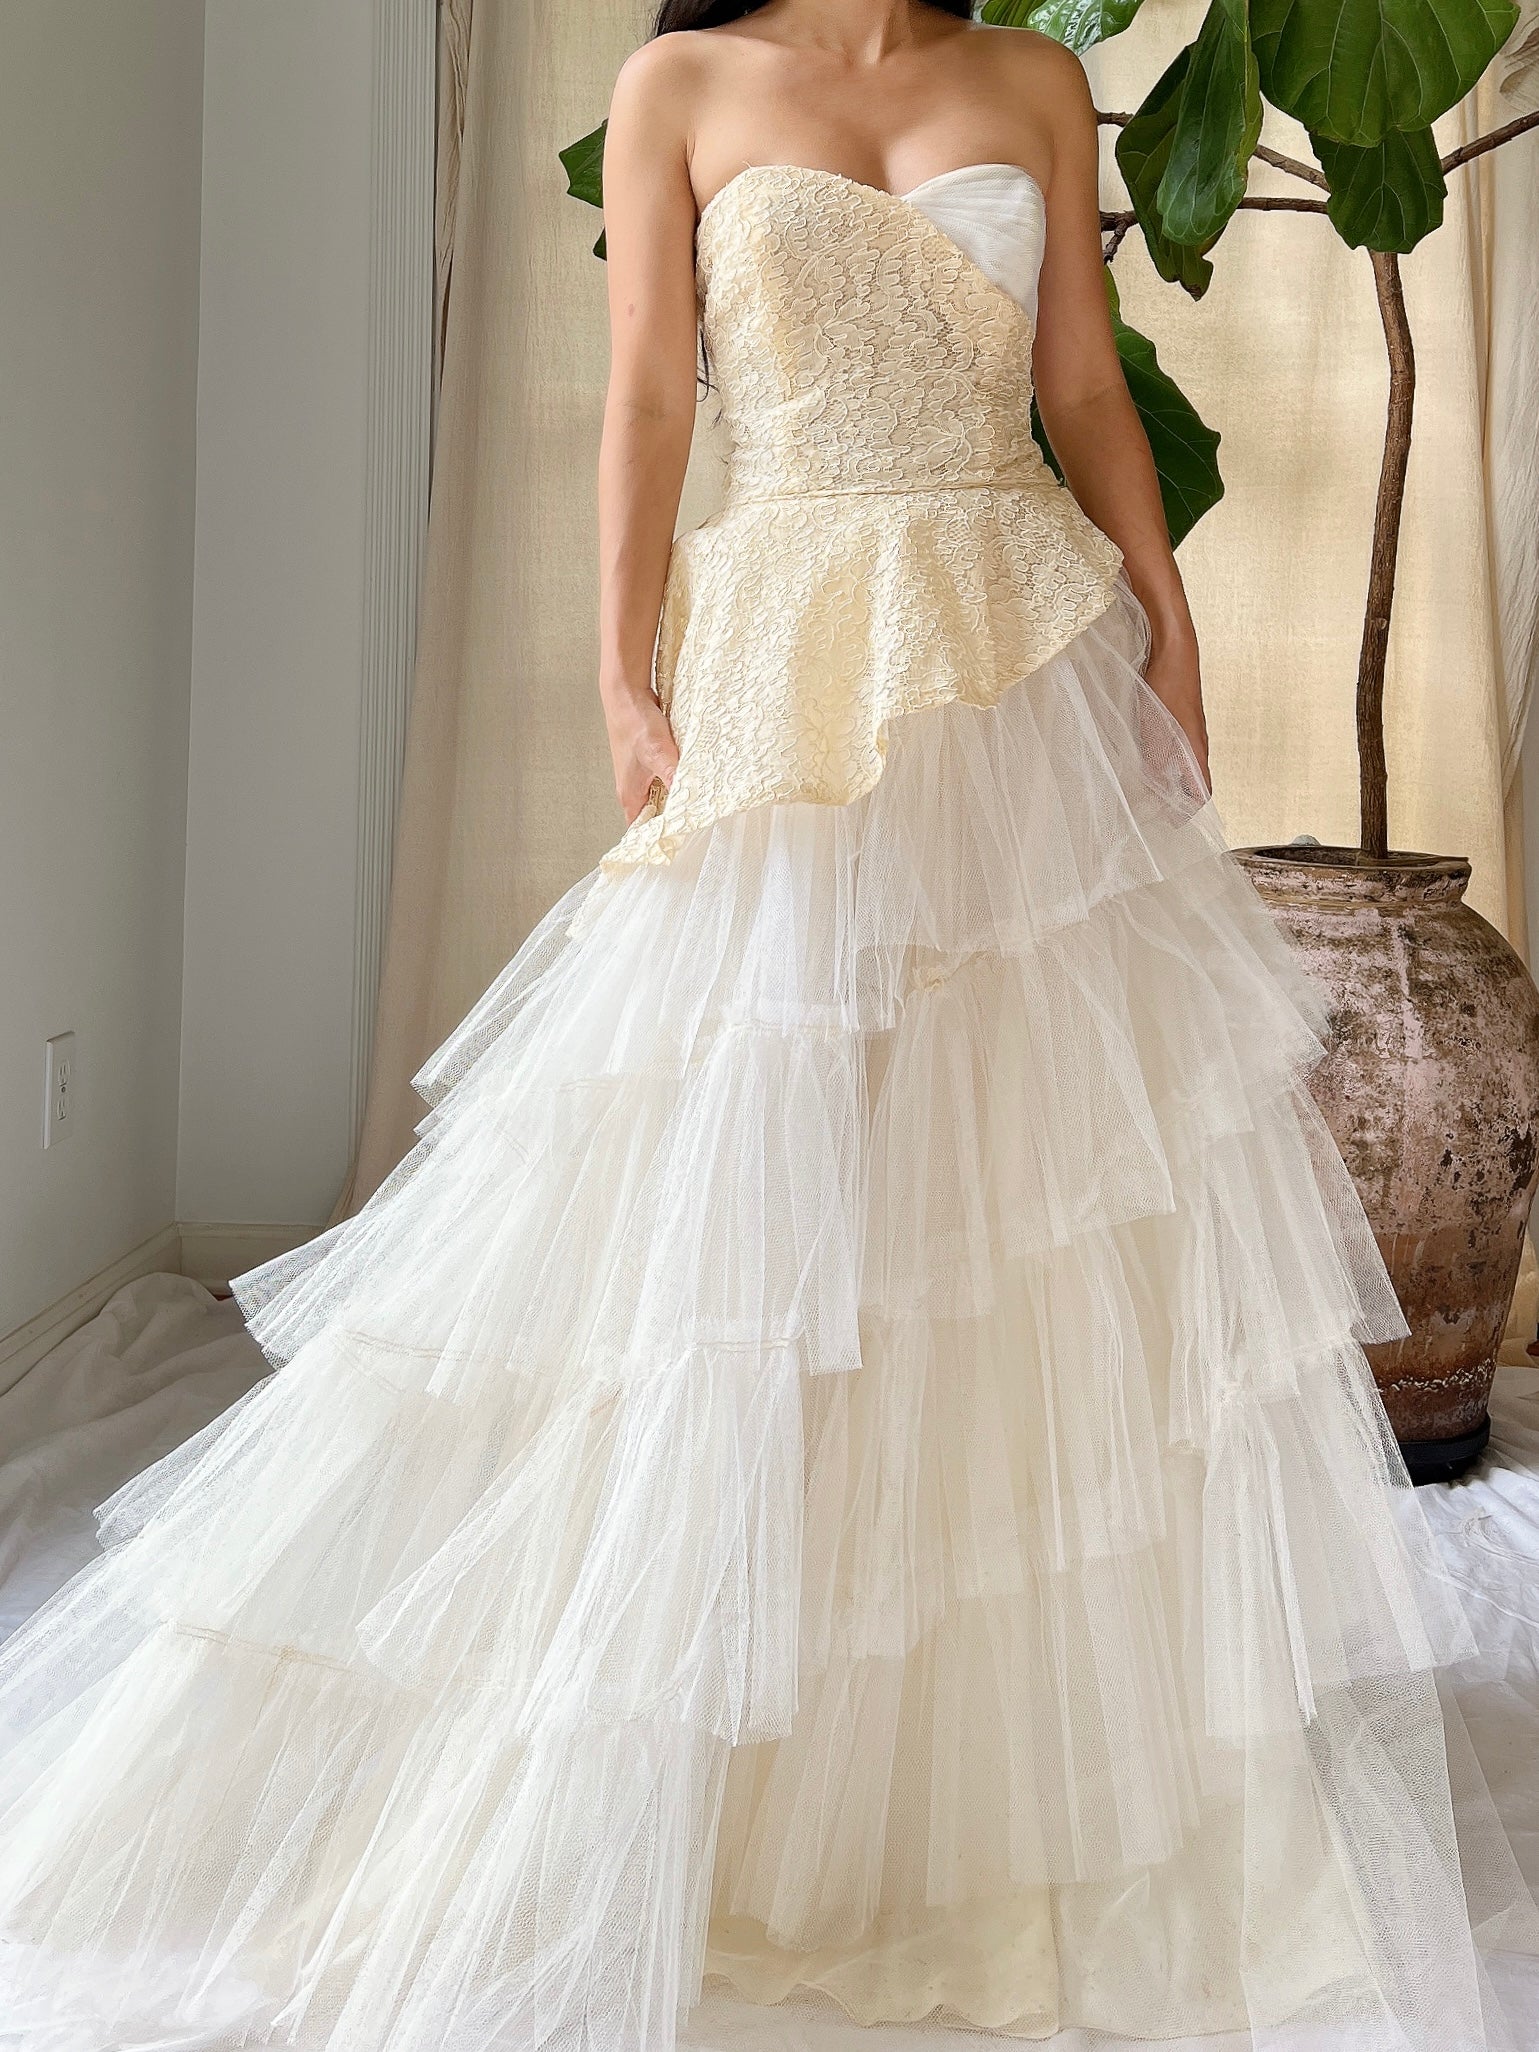 1950s Tulle and Lace Strapless Gown - S